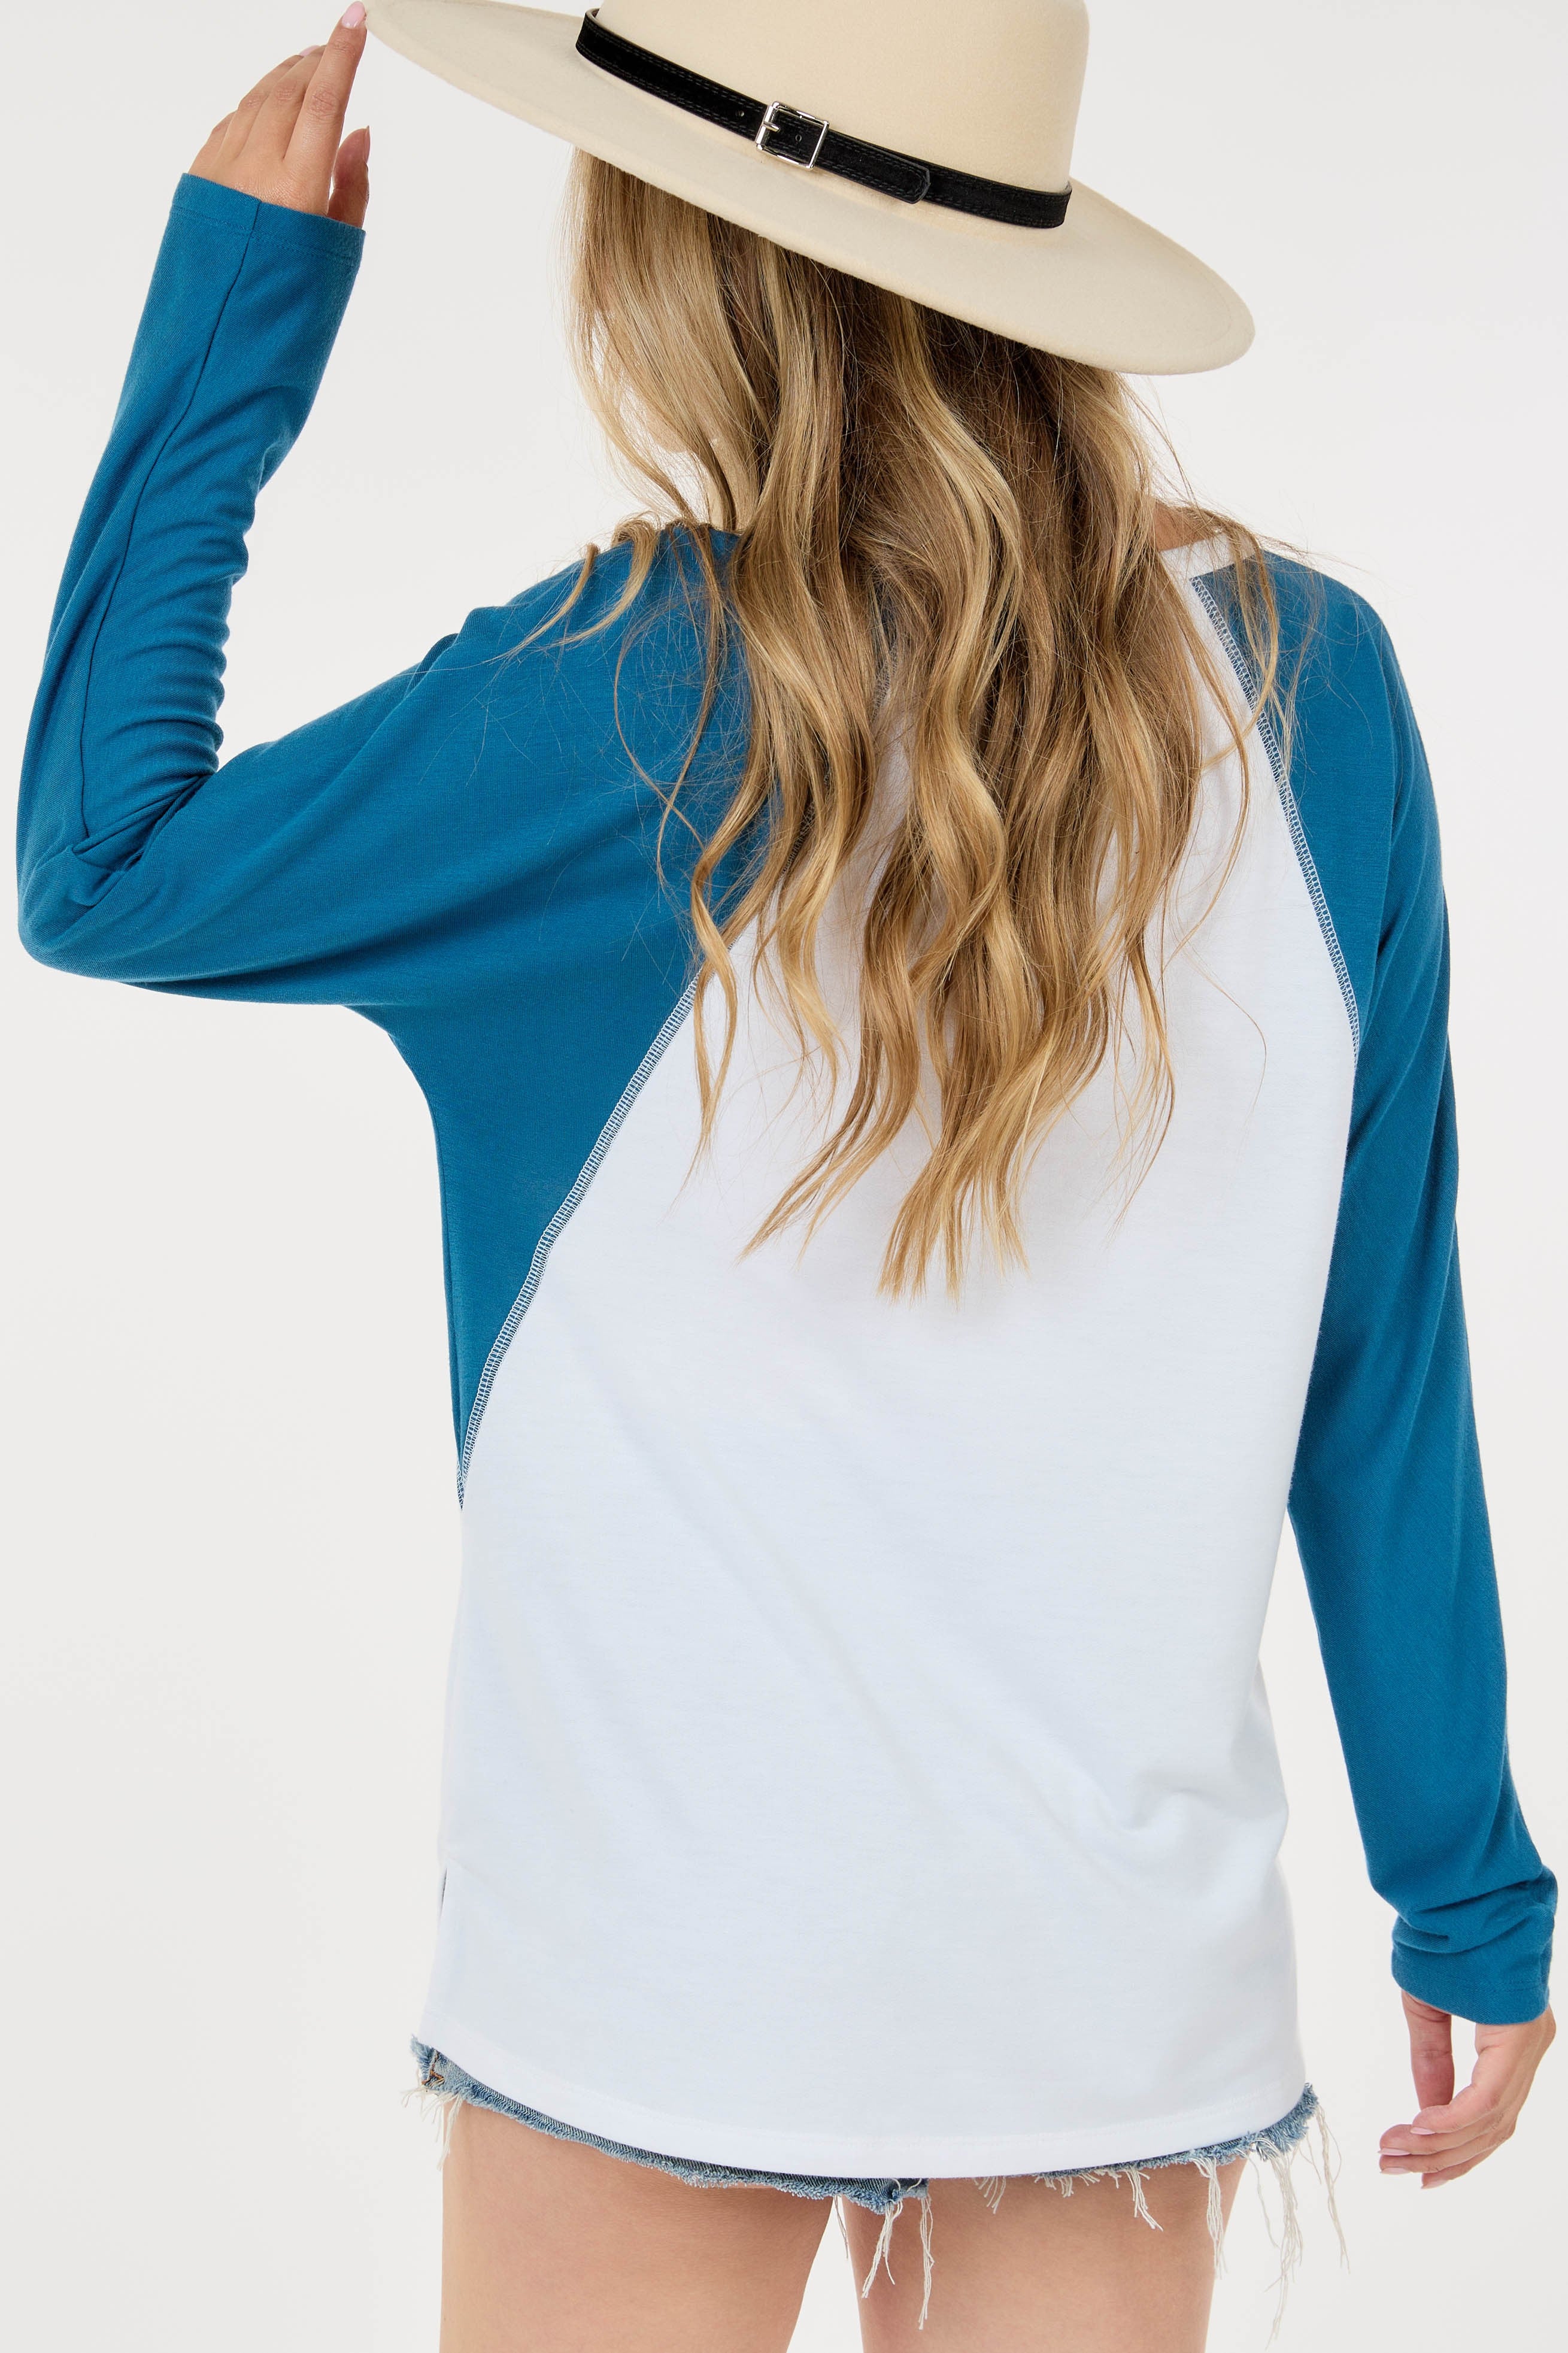 THE PATRICIA (WHITE/TEAL) - XL ONLY